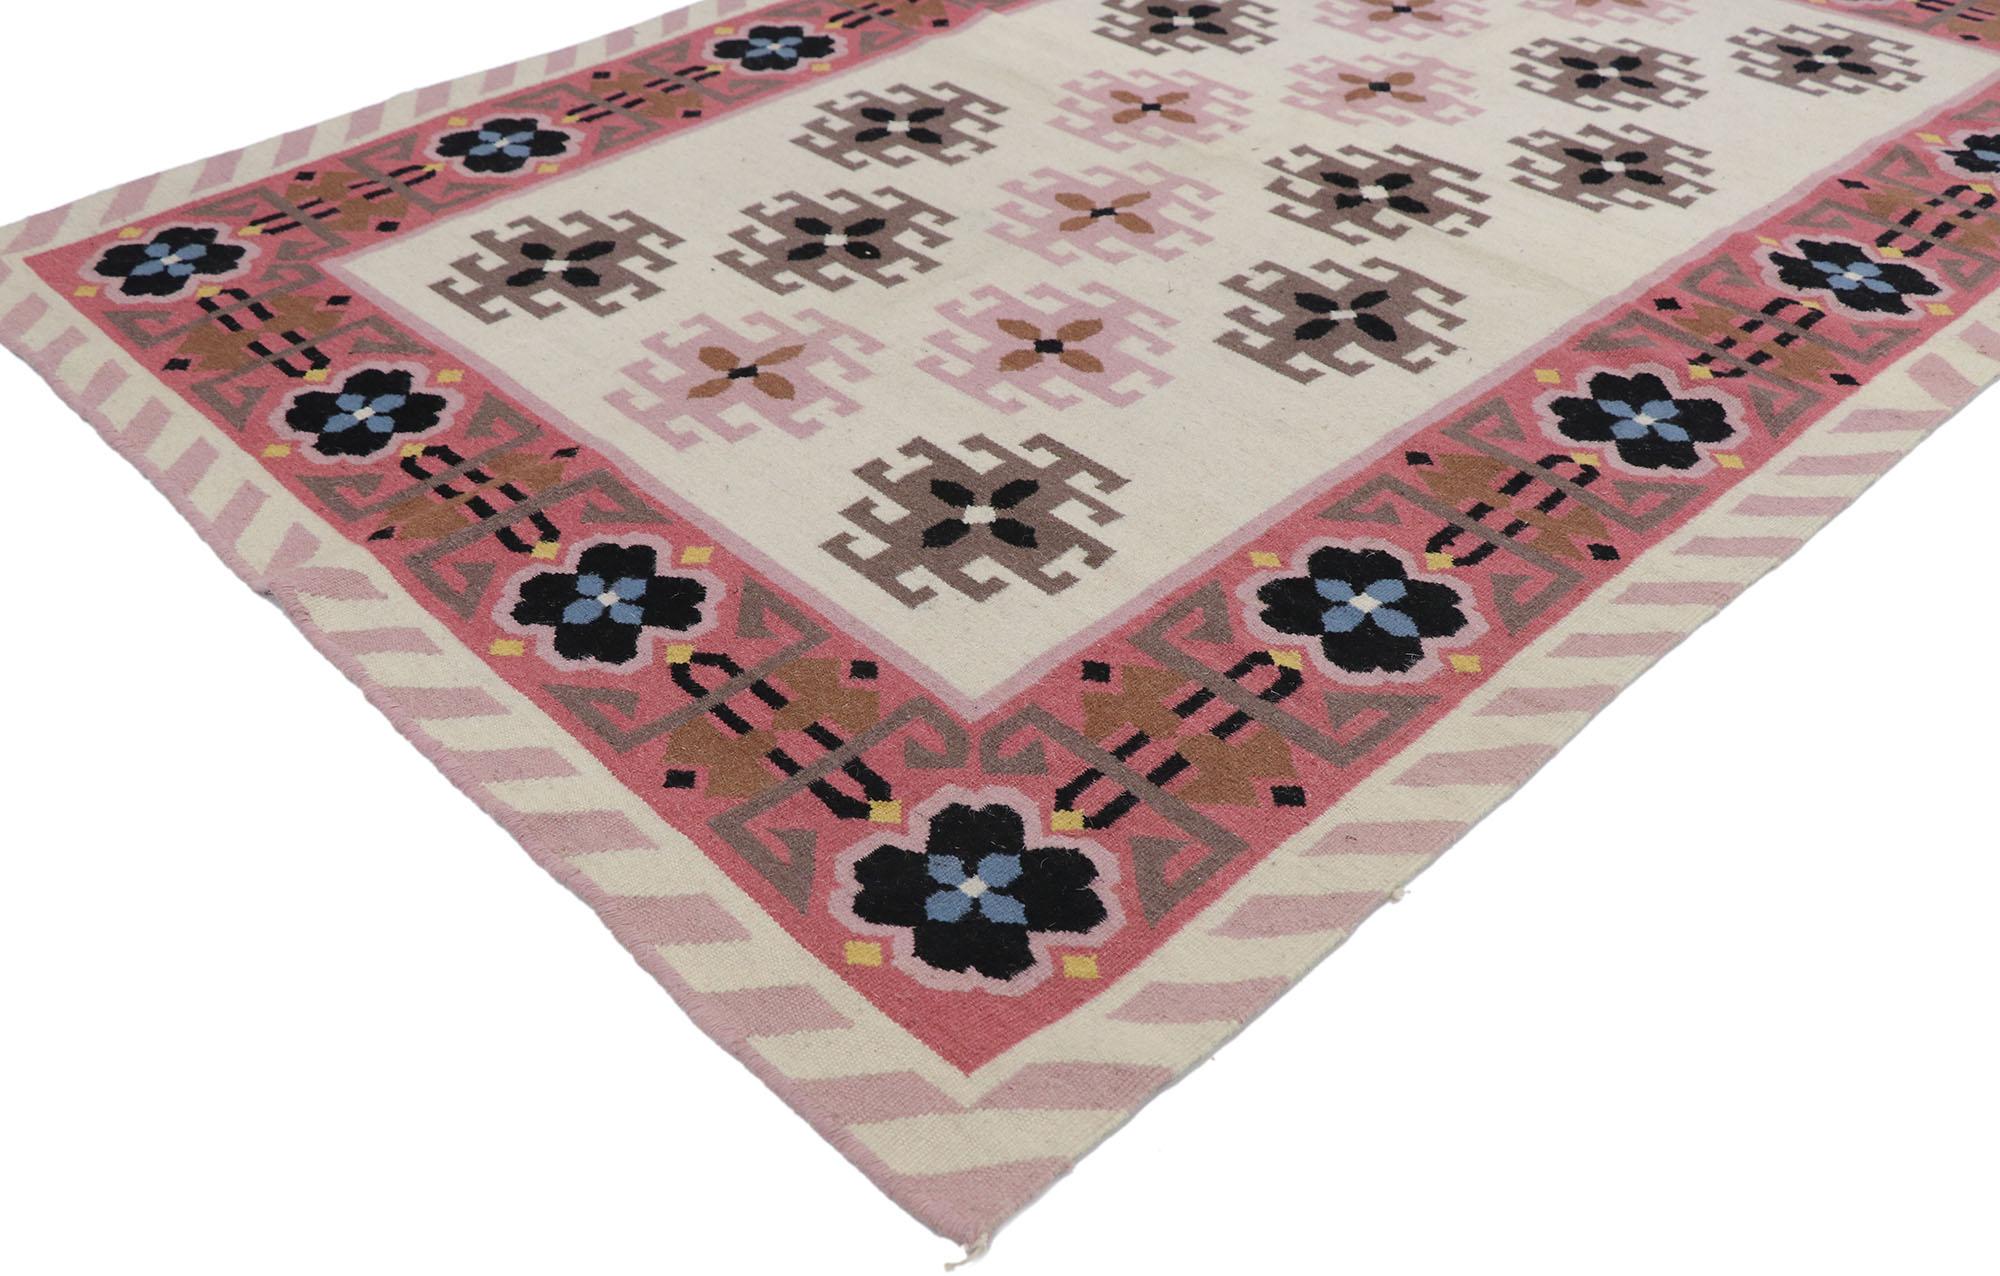 77804 Vintage Romanian Geometric Kilim rug with Modern Tribal style 04'01 x 06'00. Showcasing a bold expressive design, incredible detail and texture, this hand woven wool vintage Romanian kilim rug is a captivating vision of woven beauty. The